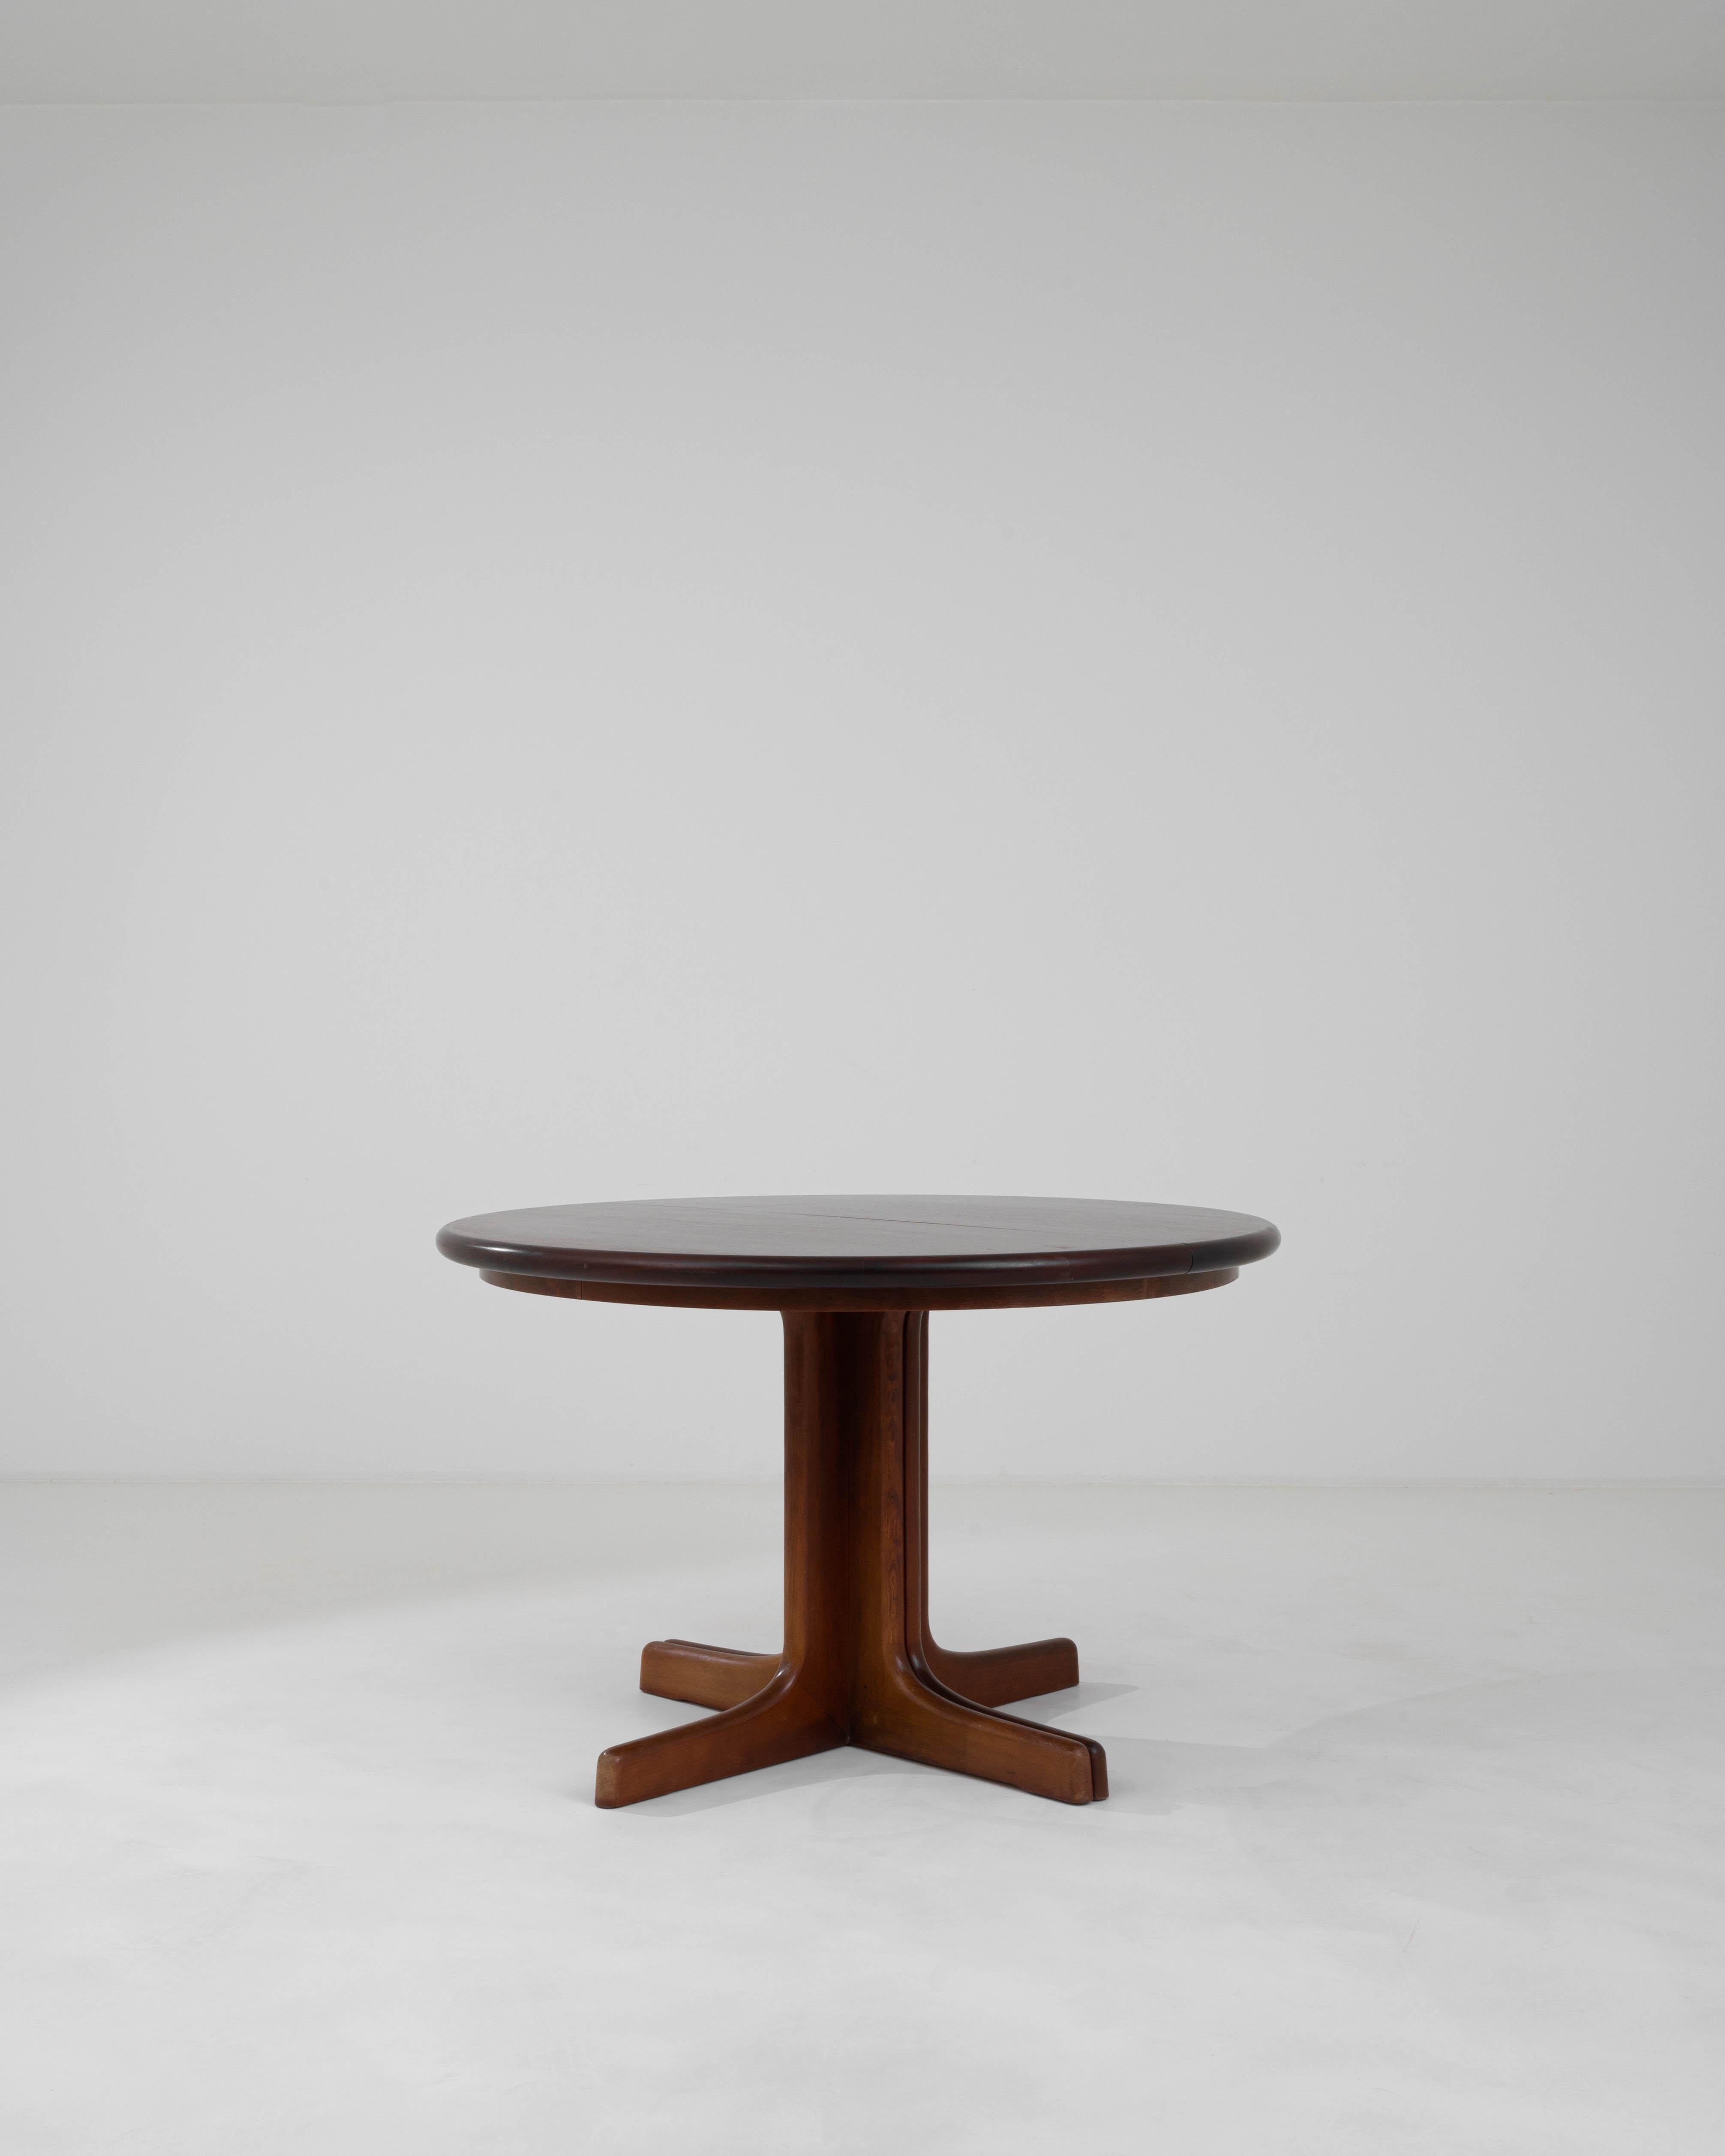 20th Century German Wooden Dining Table By Casala 1